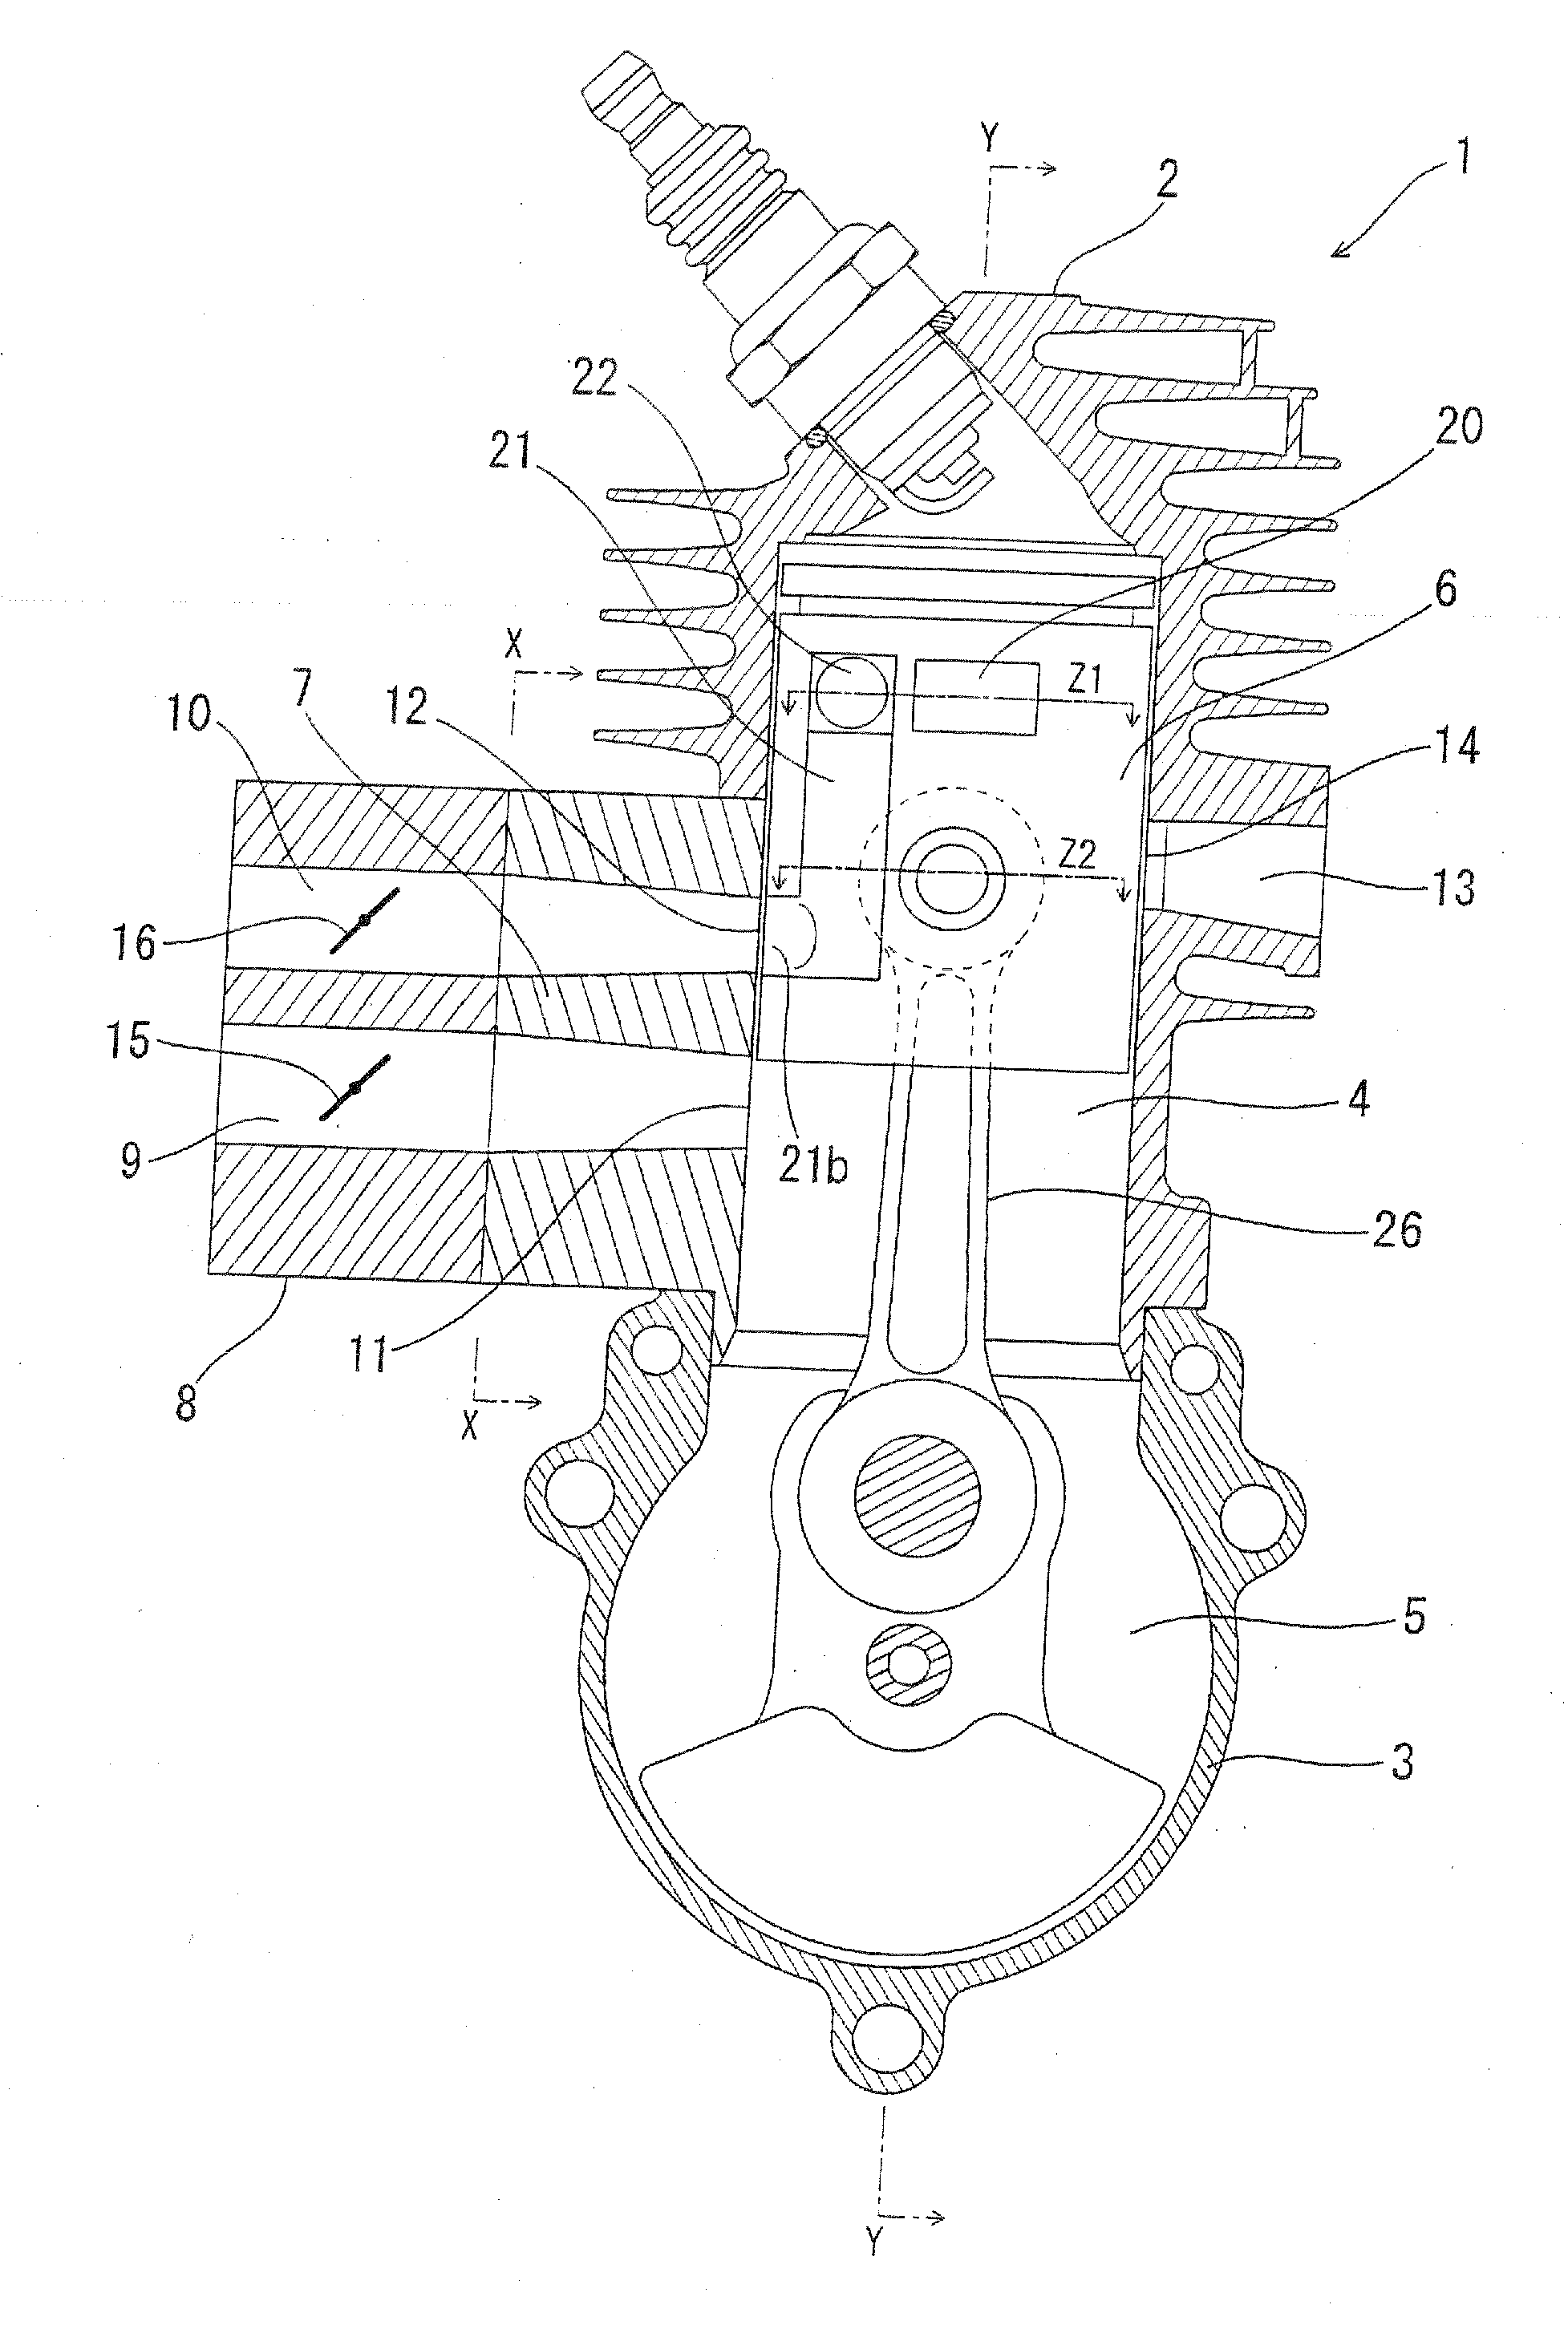 Stratified Scavenging Two-Cycle Engine